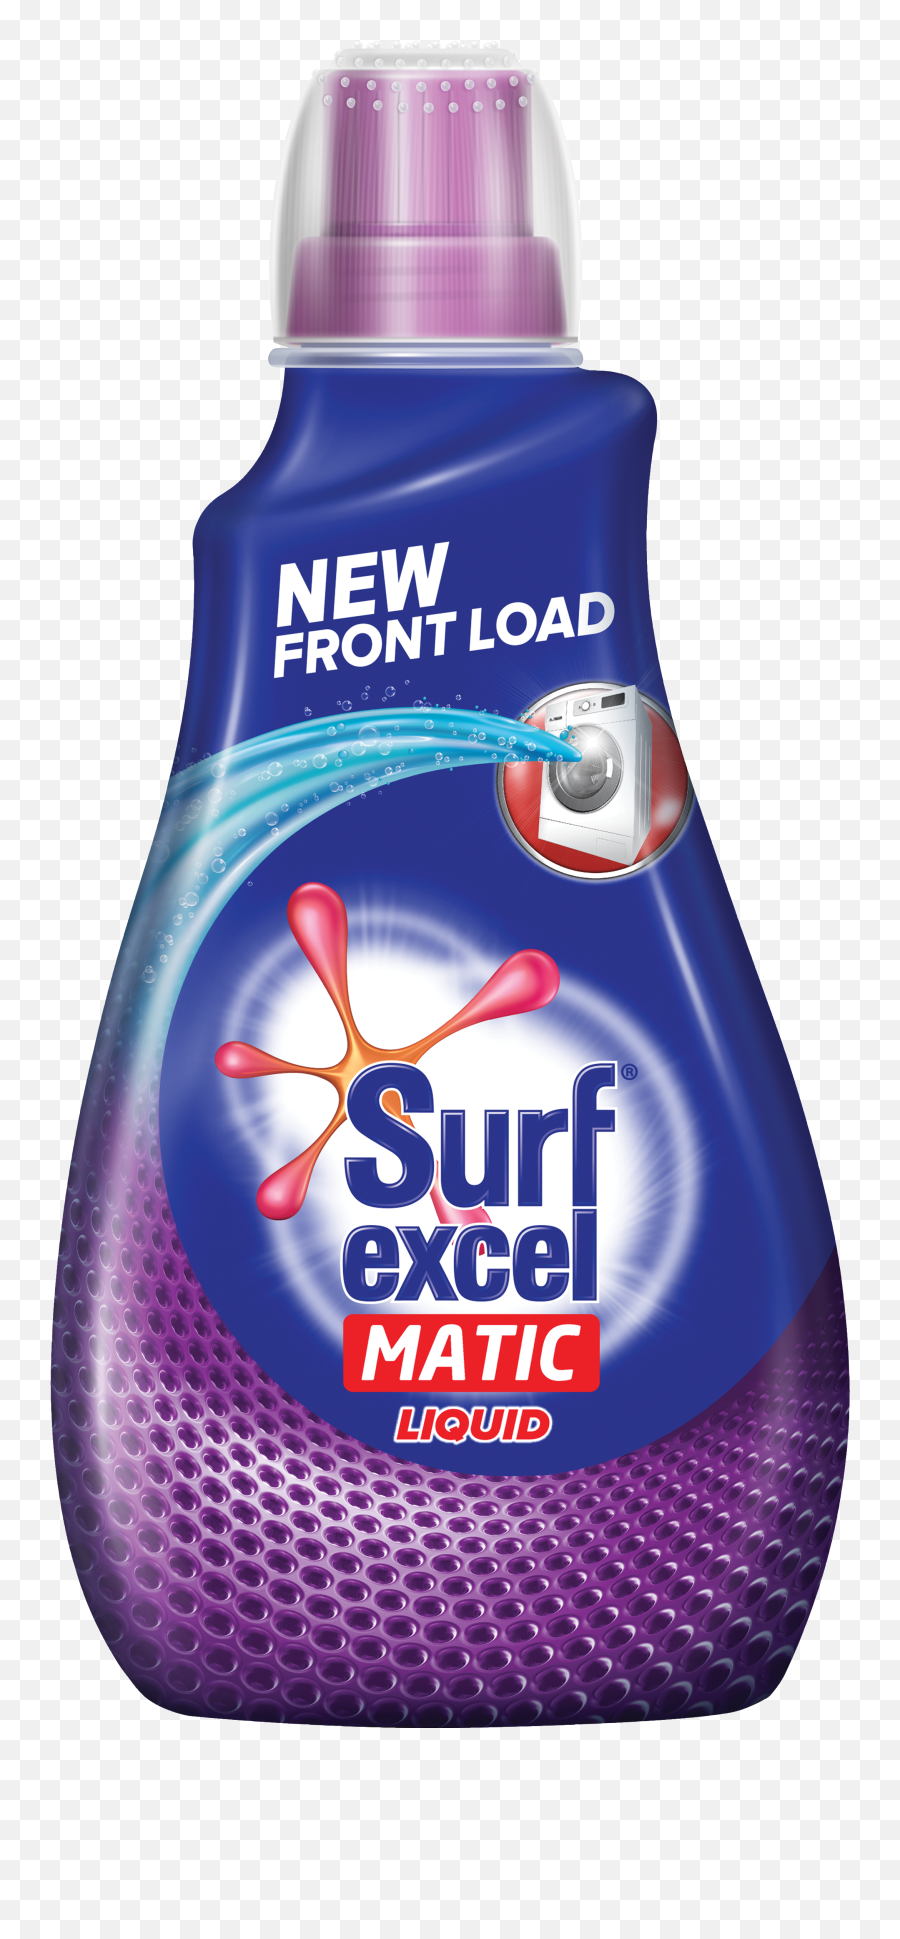 Download Surf Excel Matic Liquid - Full Size Png Image Pngkit Surf Excel Matic Top Load 1kg,Excel Png